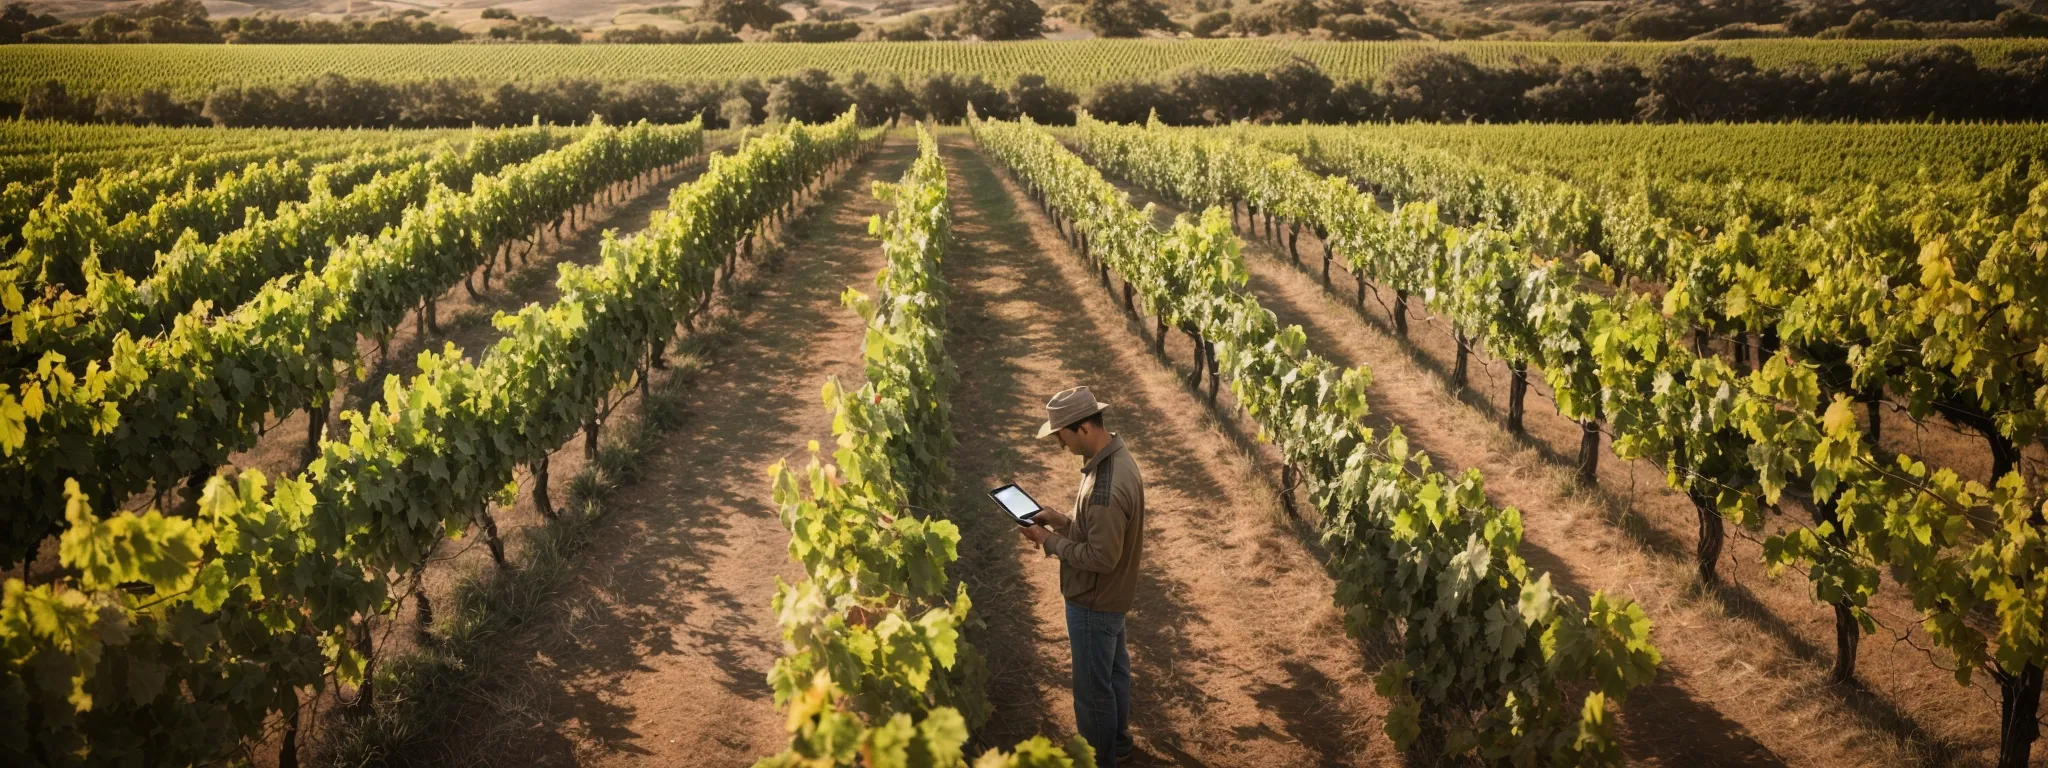 a vineyard stretched out under the golden sun, with a winemaker using a tablet among the rows of grapevines.